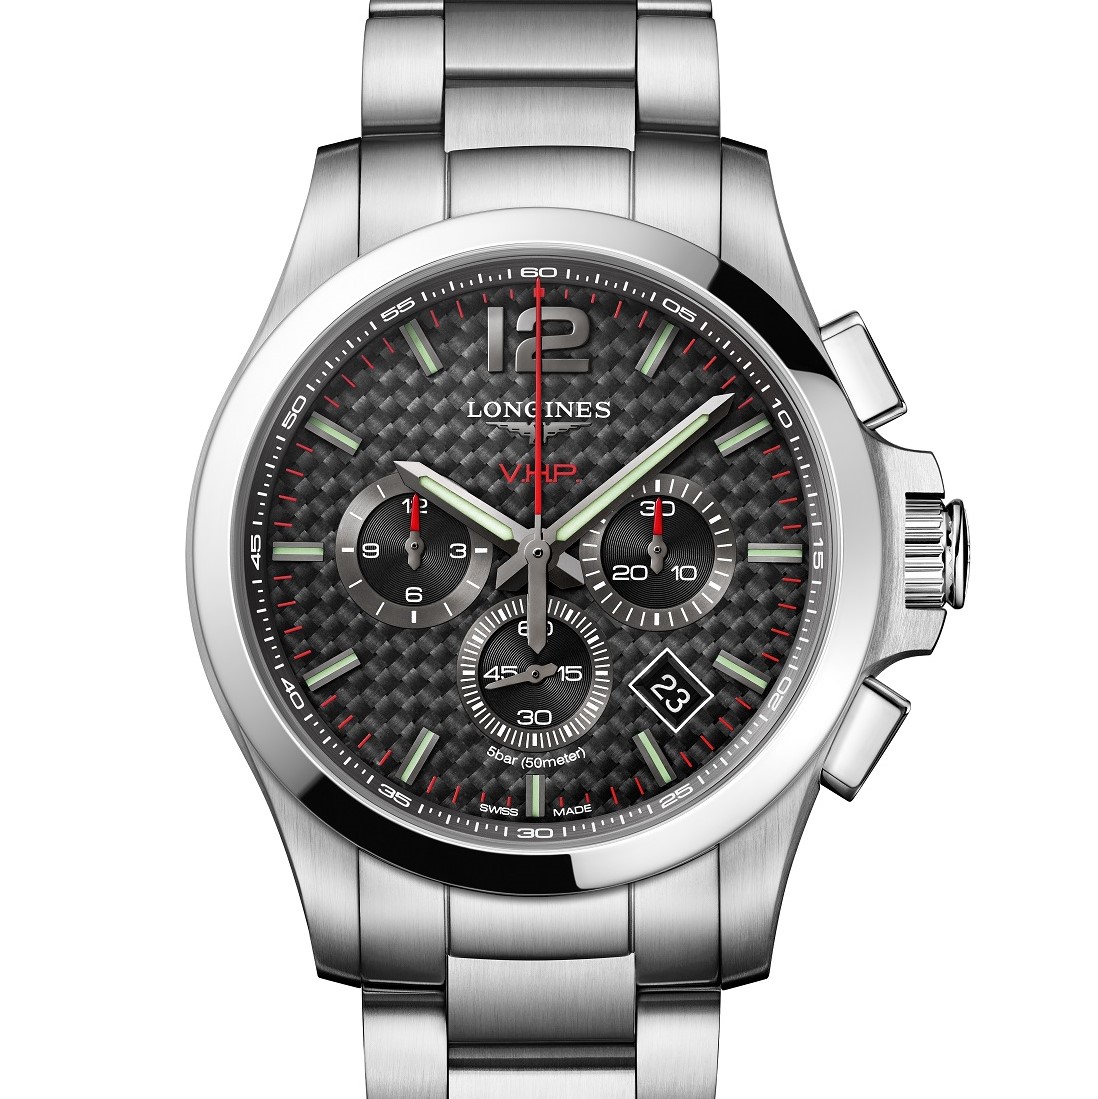 Longines Conquest VHP Chronograph front view